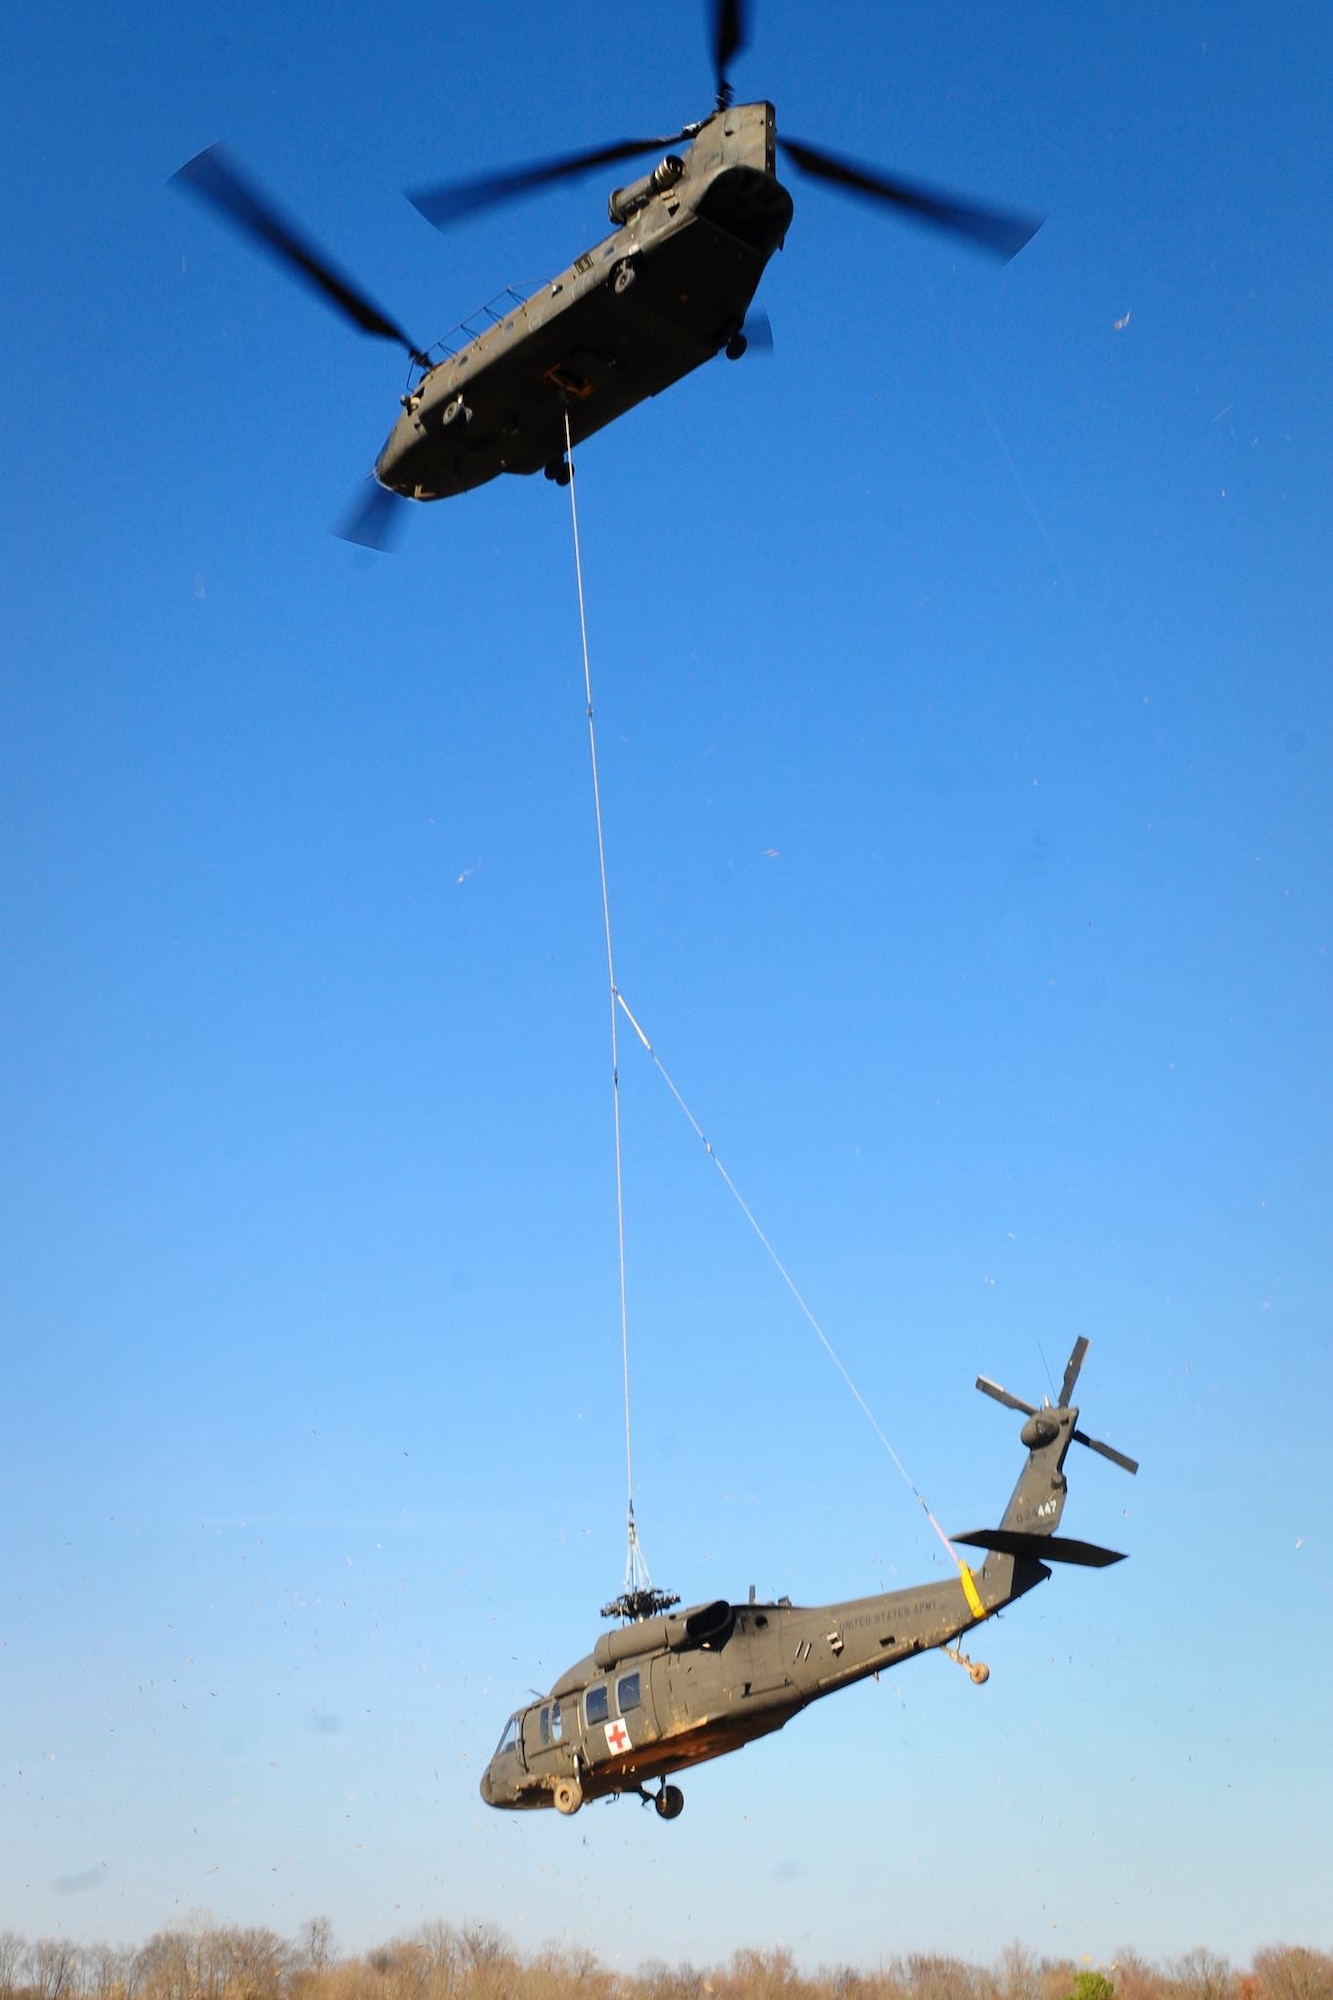 A U.S. Army CH-47 Chinook helicopter pilots assigned to 2-238th General Support Aviation Battalion, S.C. Army National Guard, sling-load a UH-60 Black Hawk helicopter from 1-171st General Support Aviation Battalion, S.C. Army National Guard. after the Black Hawk made an emergency landing in an open field Dec. 3, 2014, near Columbia, S.C., due to a main rotor blade malfunction. (U.S. Army photo by Sgt. Brian Calhoun)